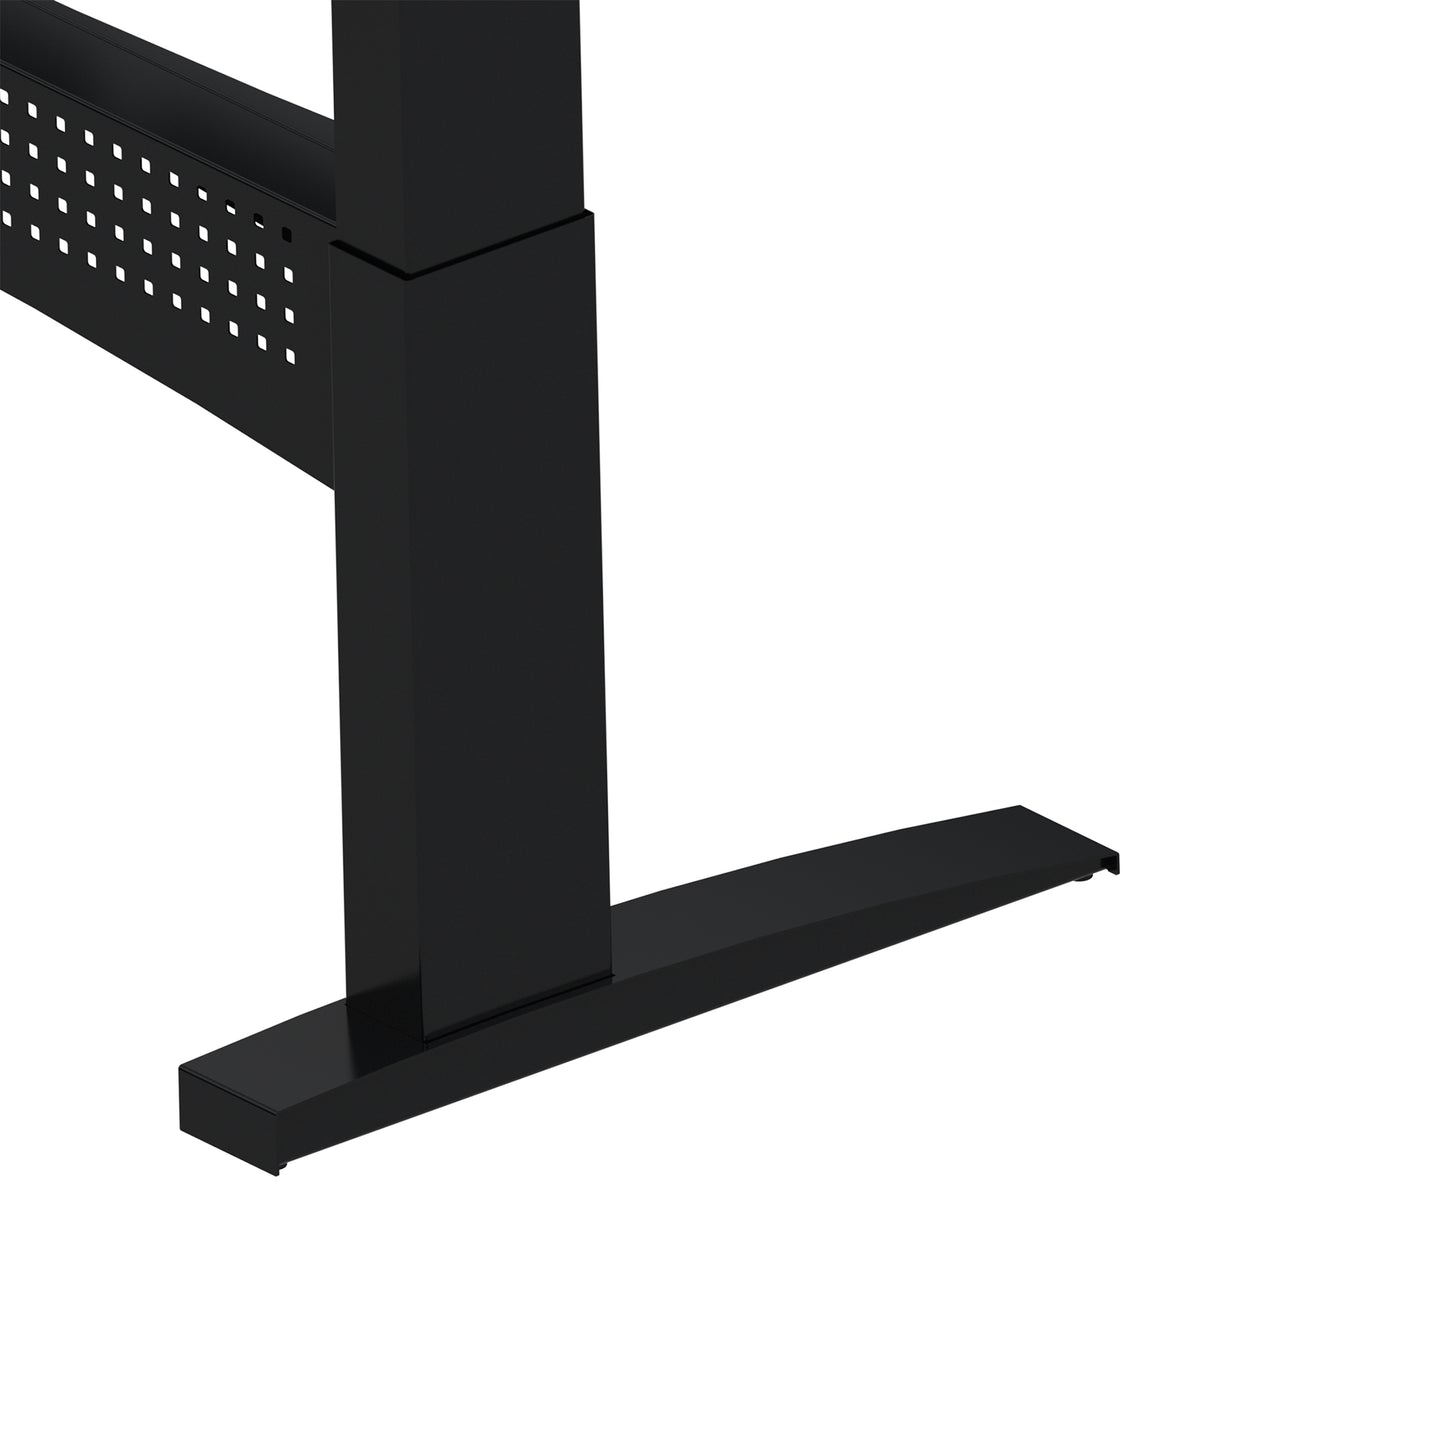 ConSet 501-11 Centre Cut Height Adjustable Sit Stand Desk